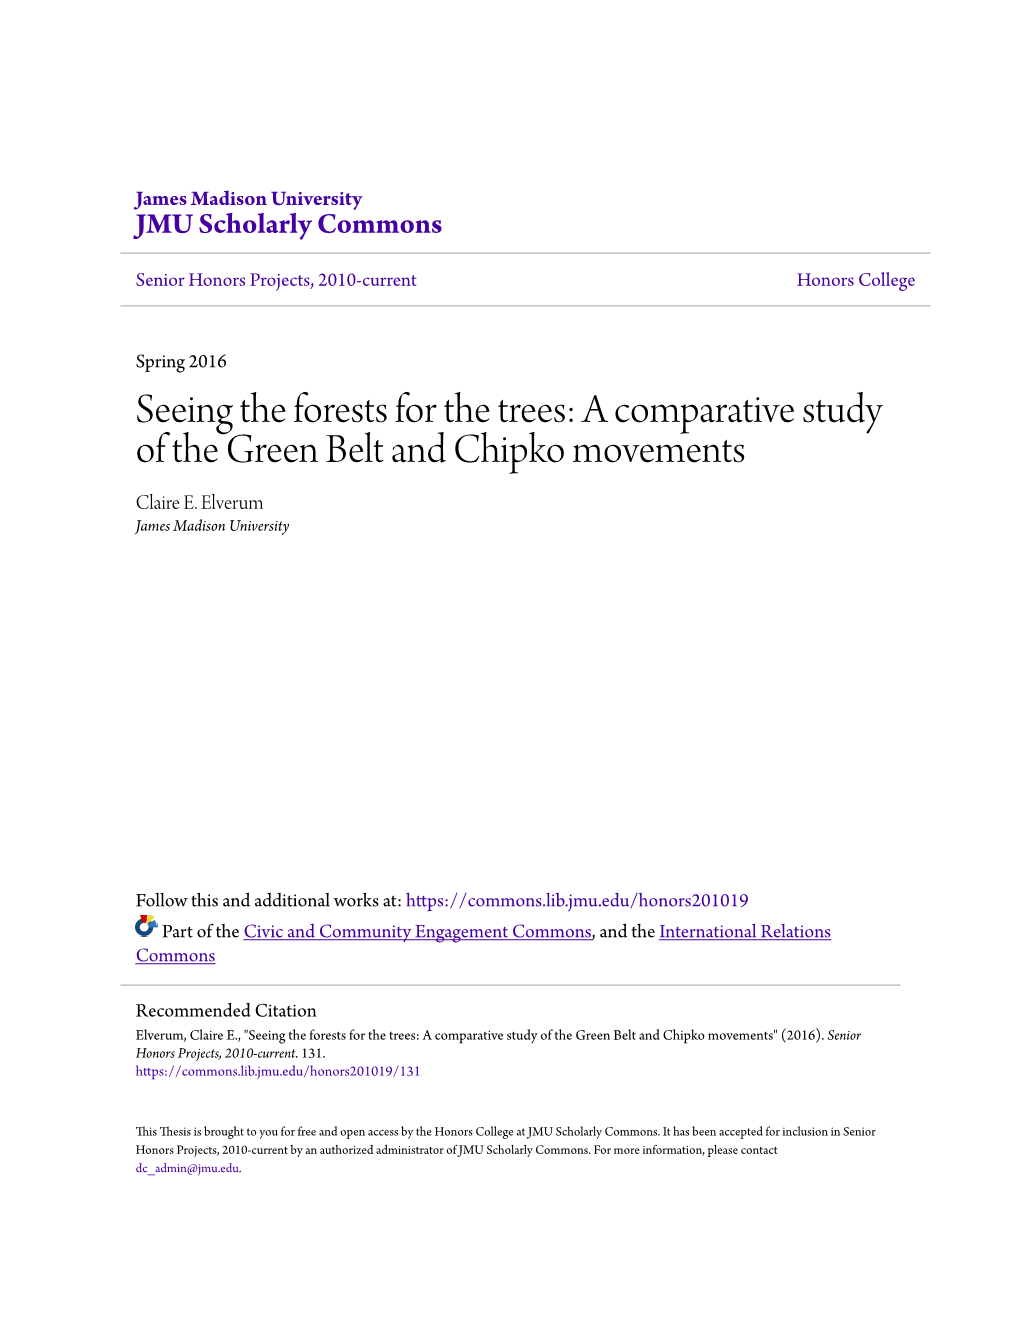 Seeing the Forests for the Trees: a Comparative Study of the Green Belt and Chipko Movements Claire E